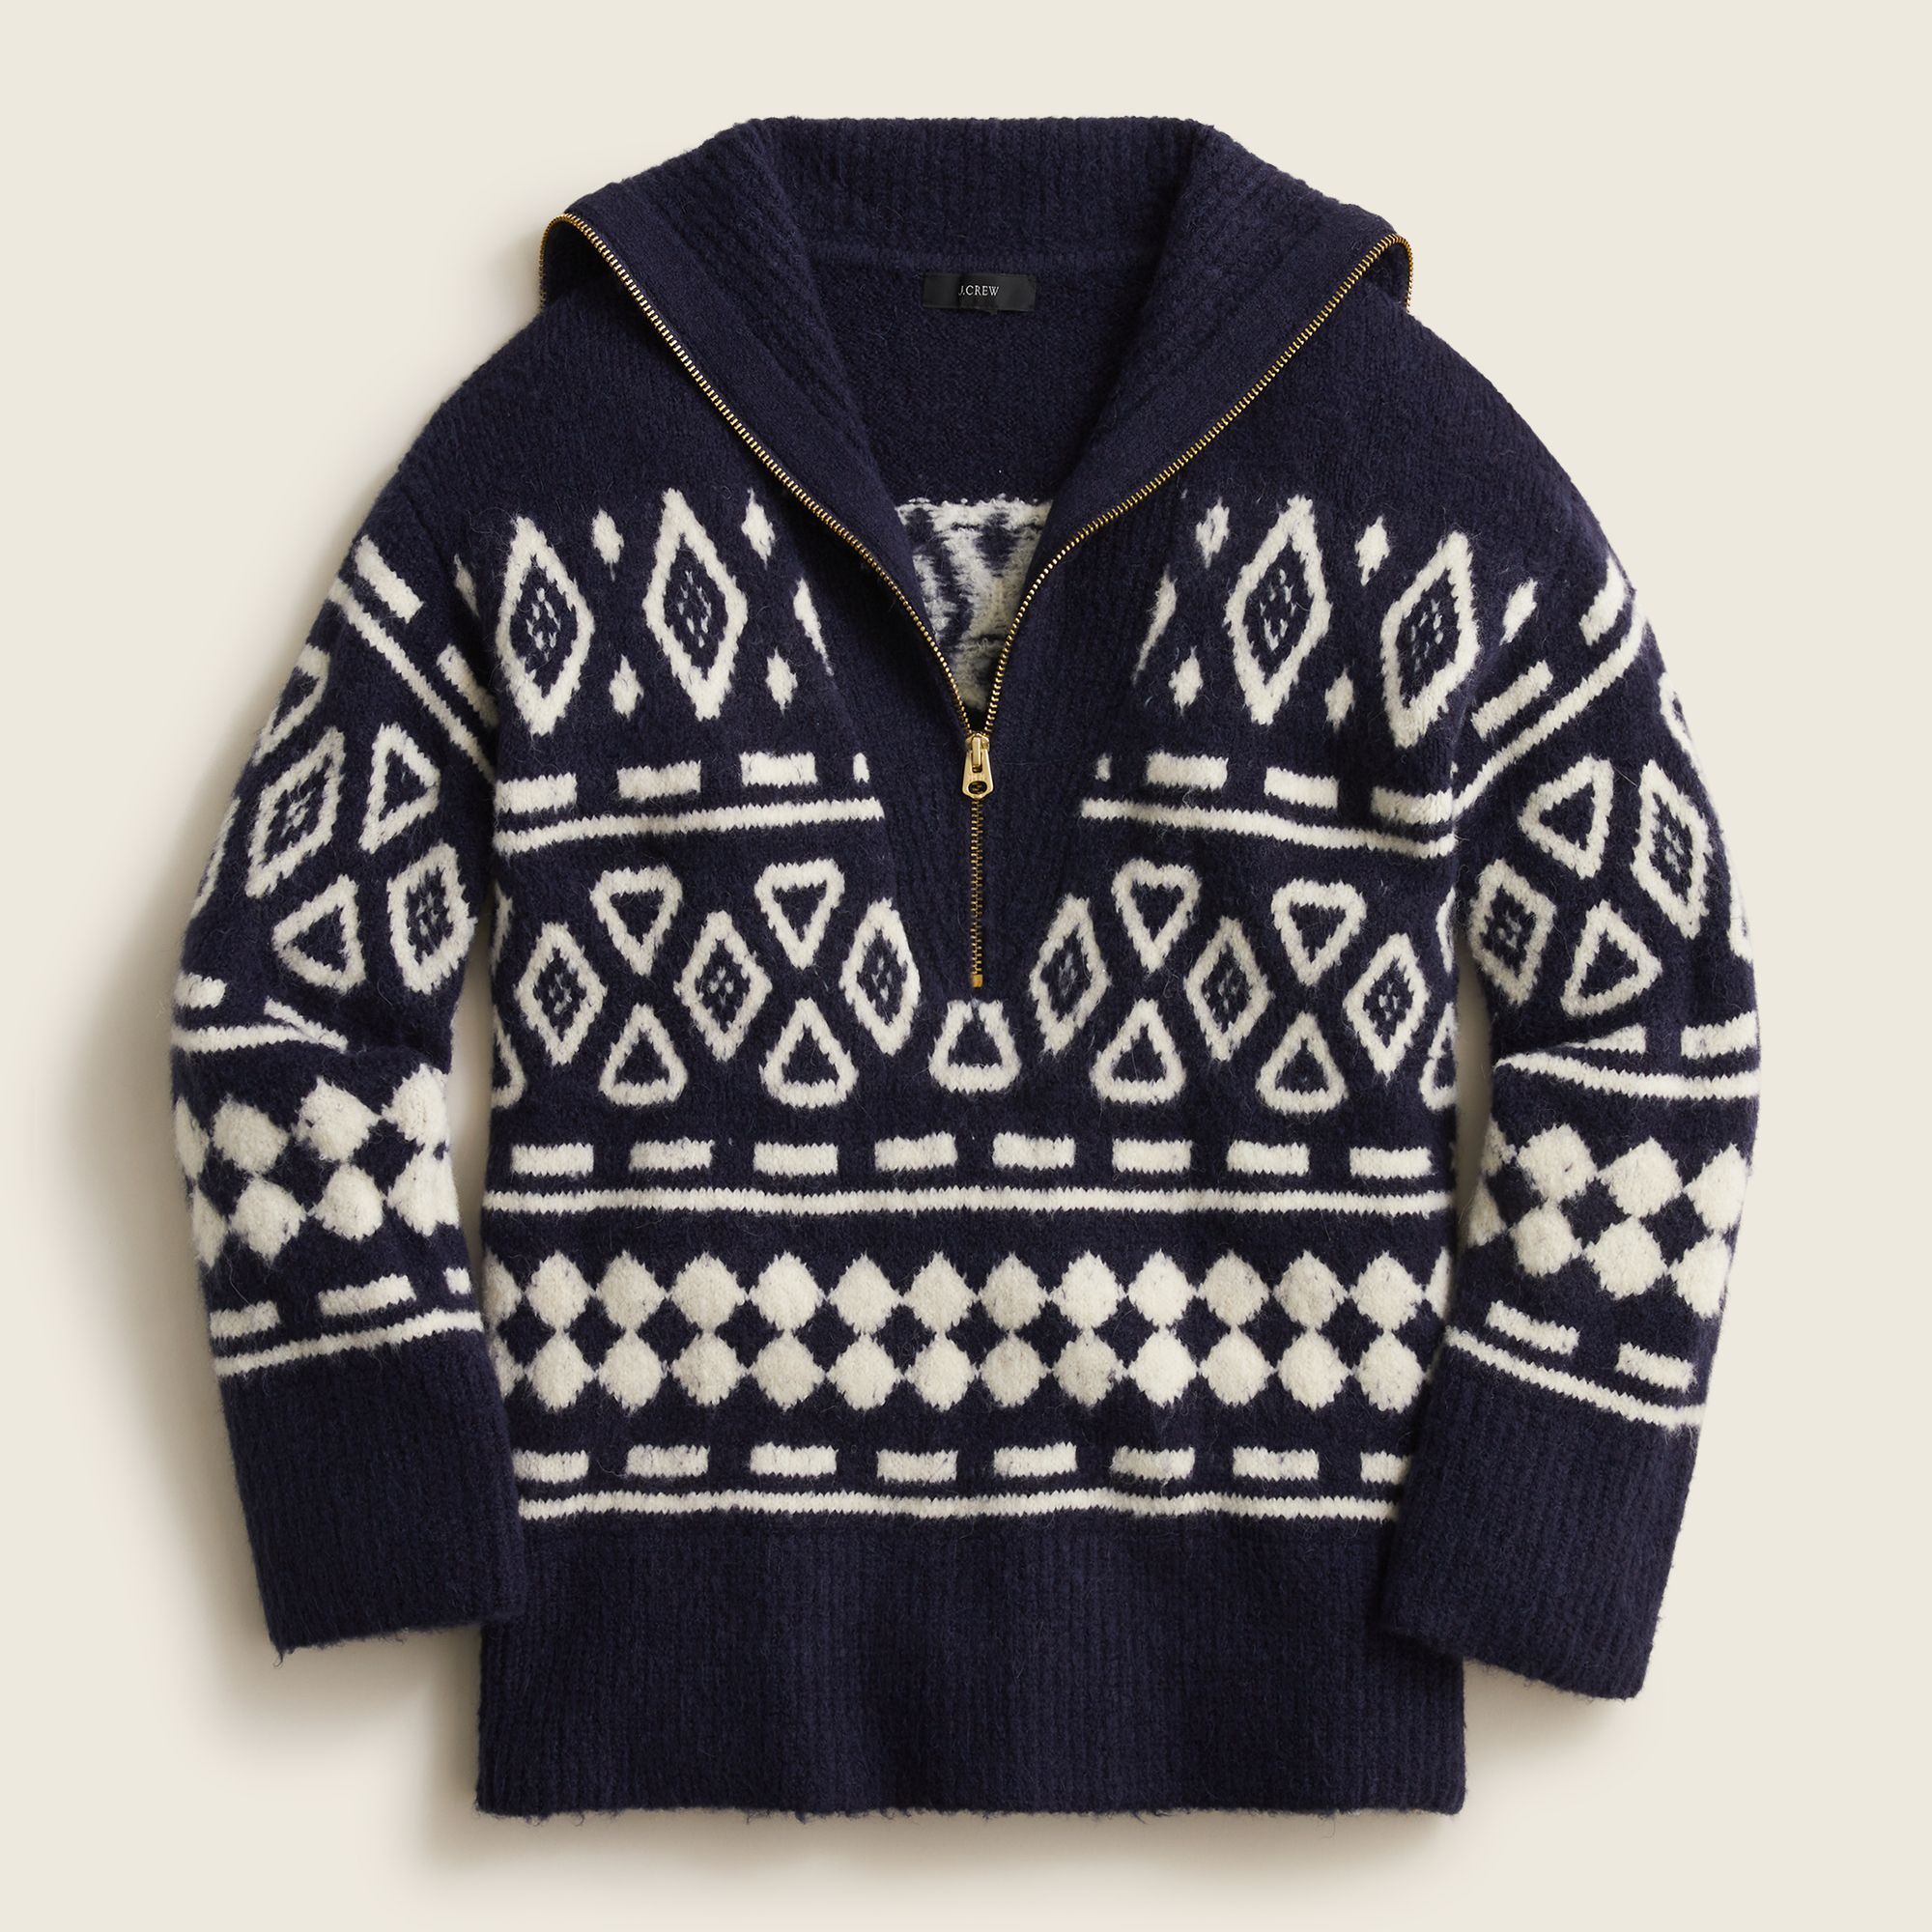 Relaxed Half-Zip Sweater in Geometric Knit